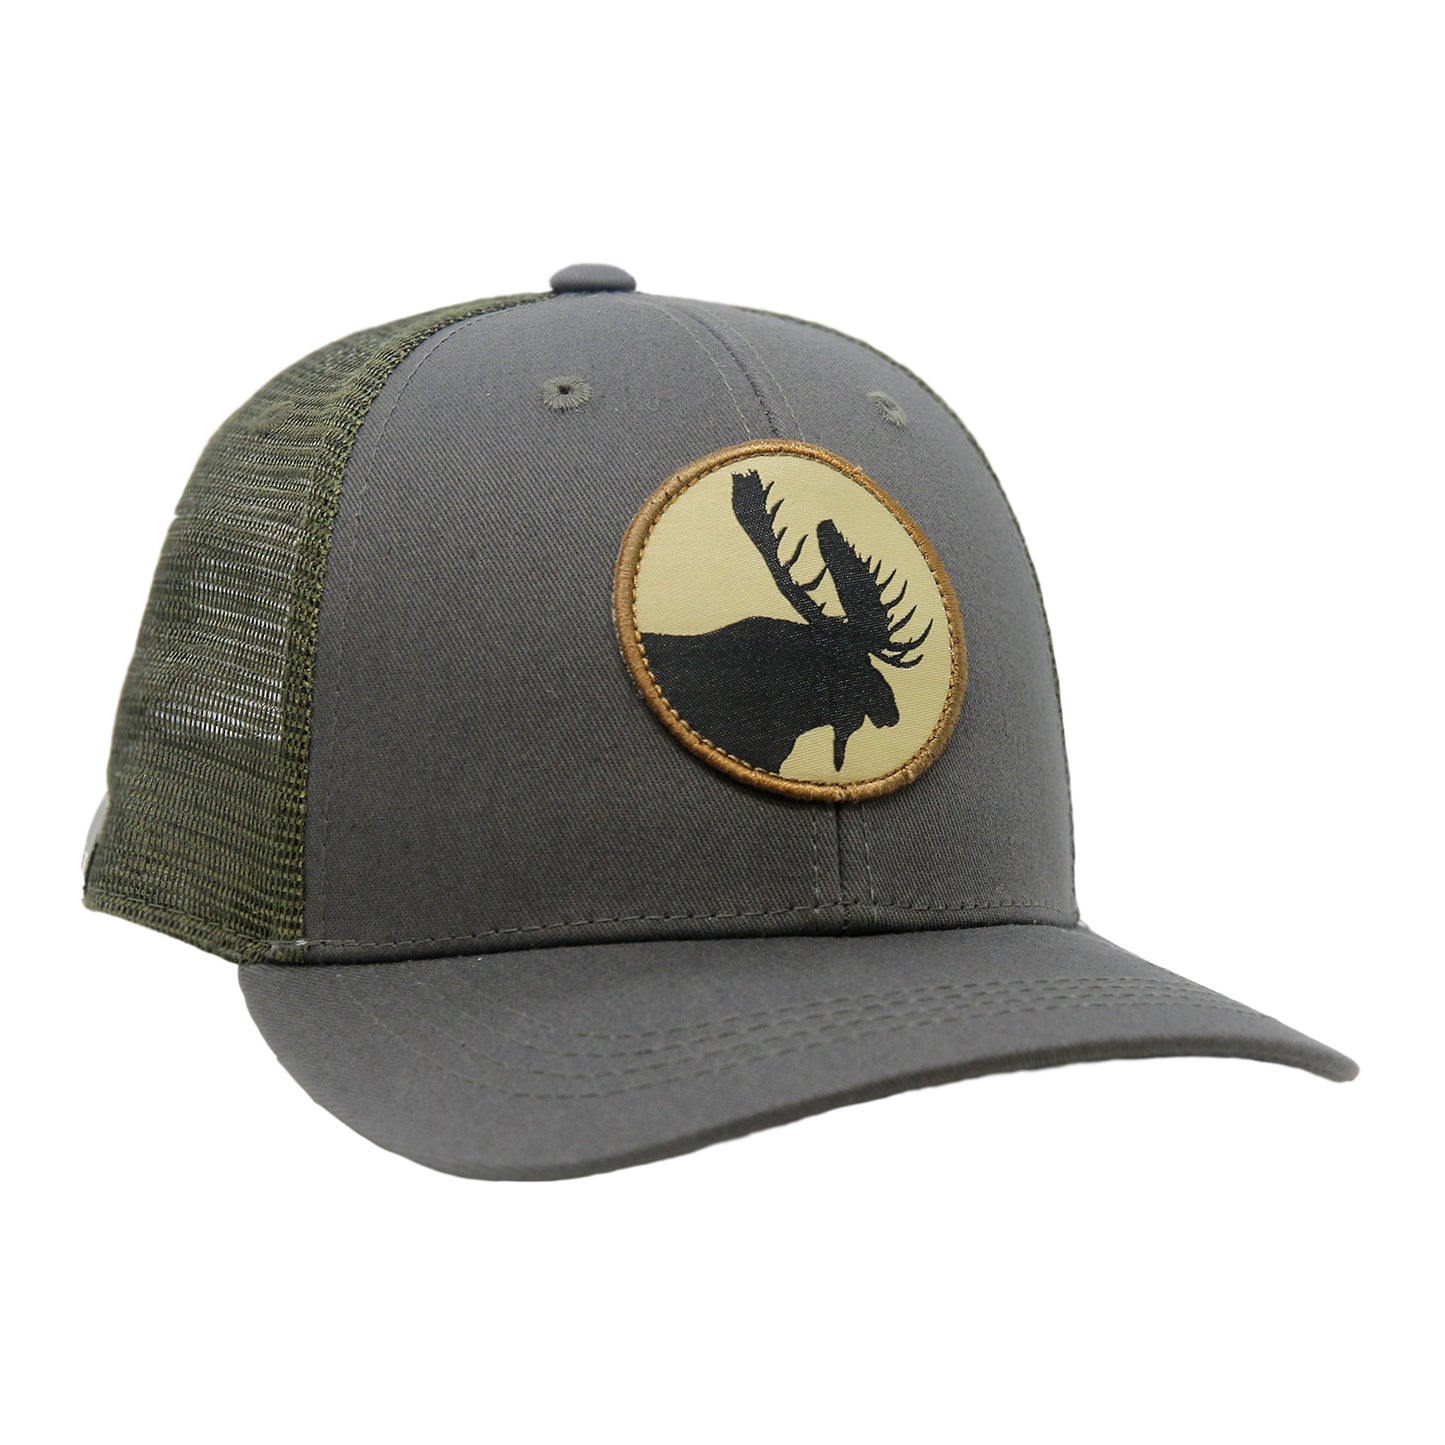 A hat with green mesh in back and gray fabric in front has a patch with a moose silhouette on the front